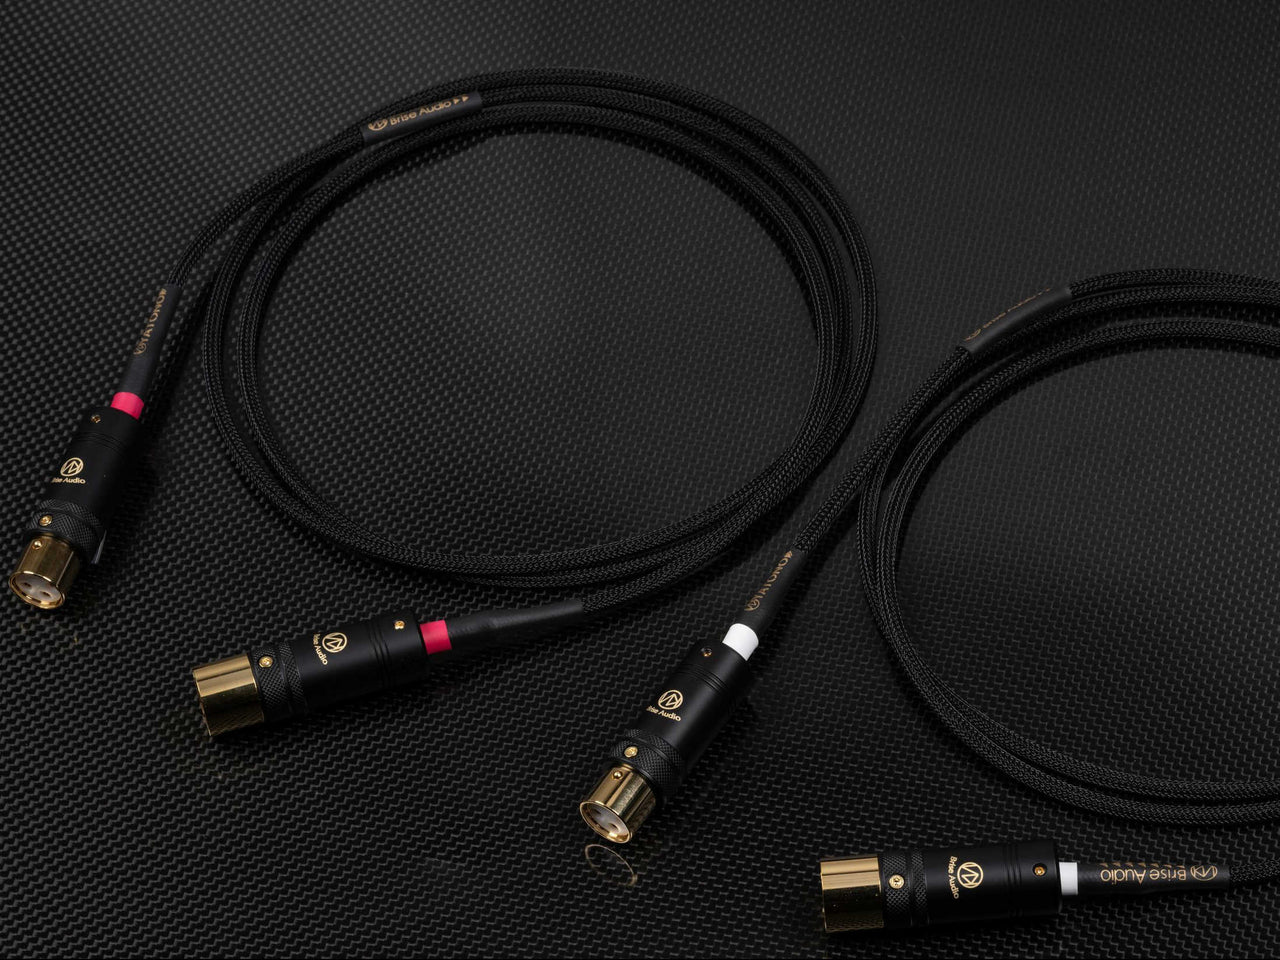 YATONO-XLR interconnect cable for high-end audio will be released on December 20, 2021.